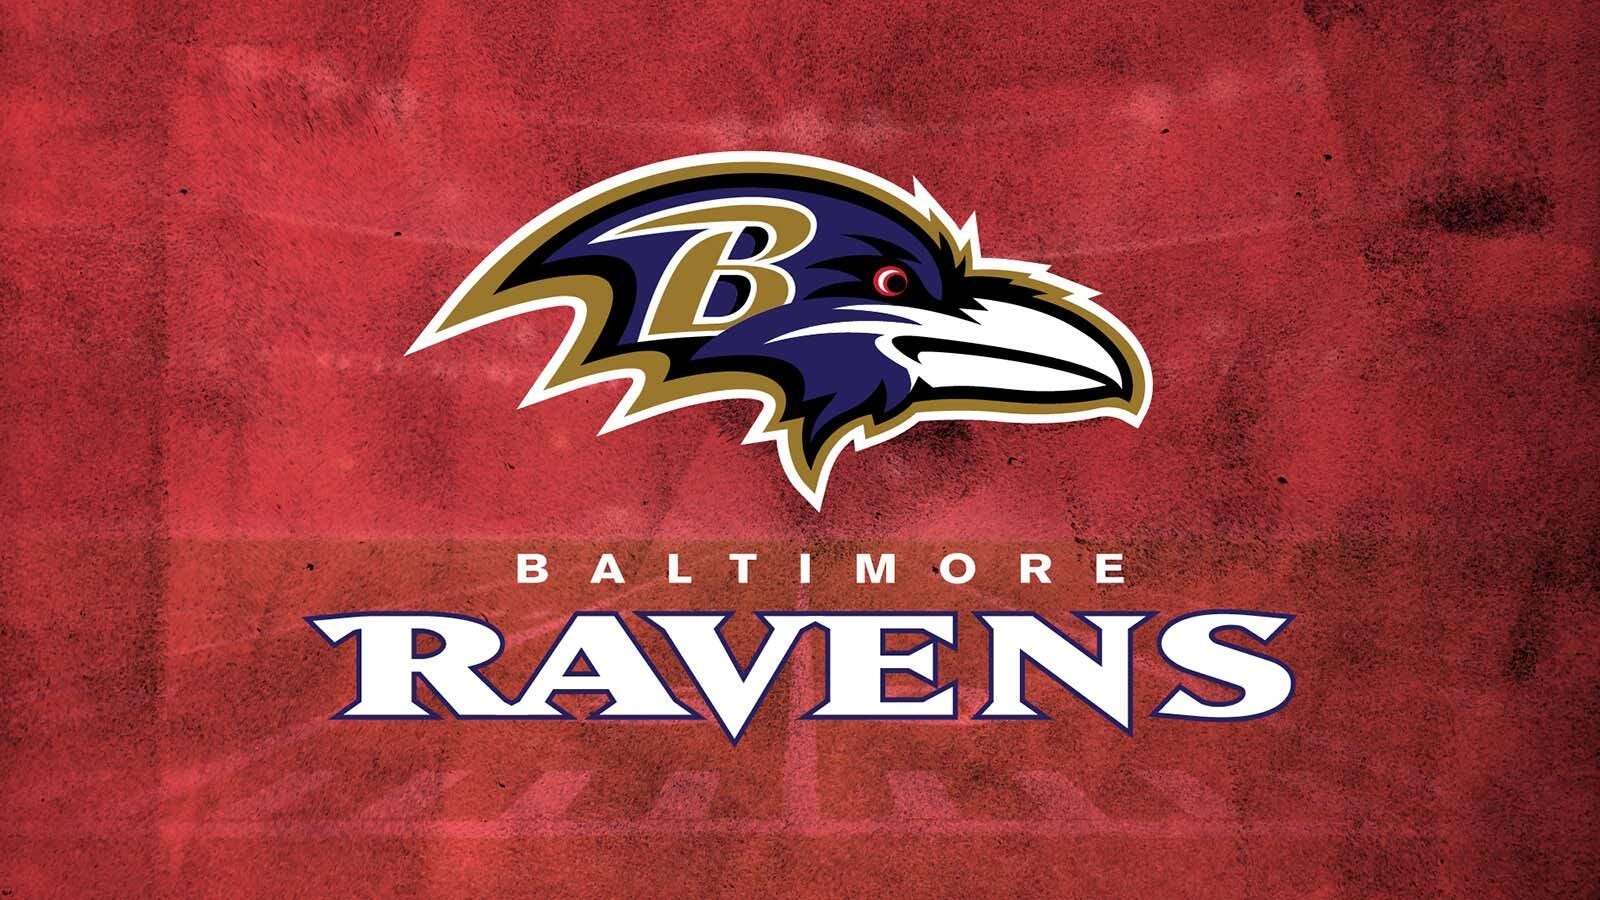 what channel do the ravens play